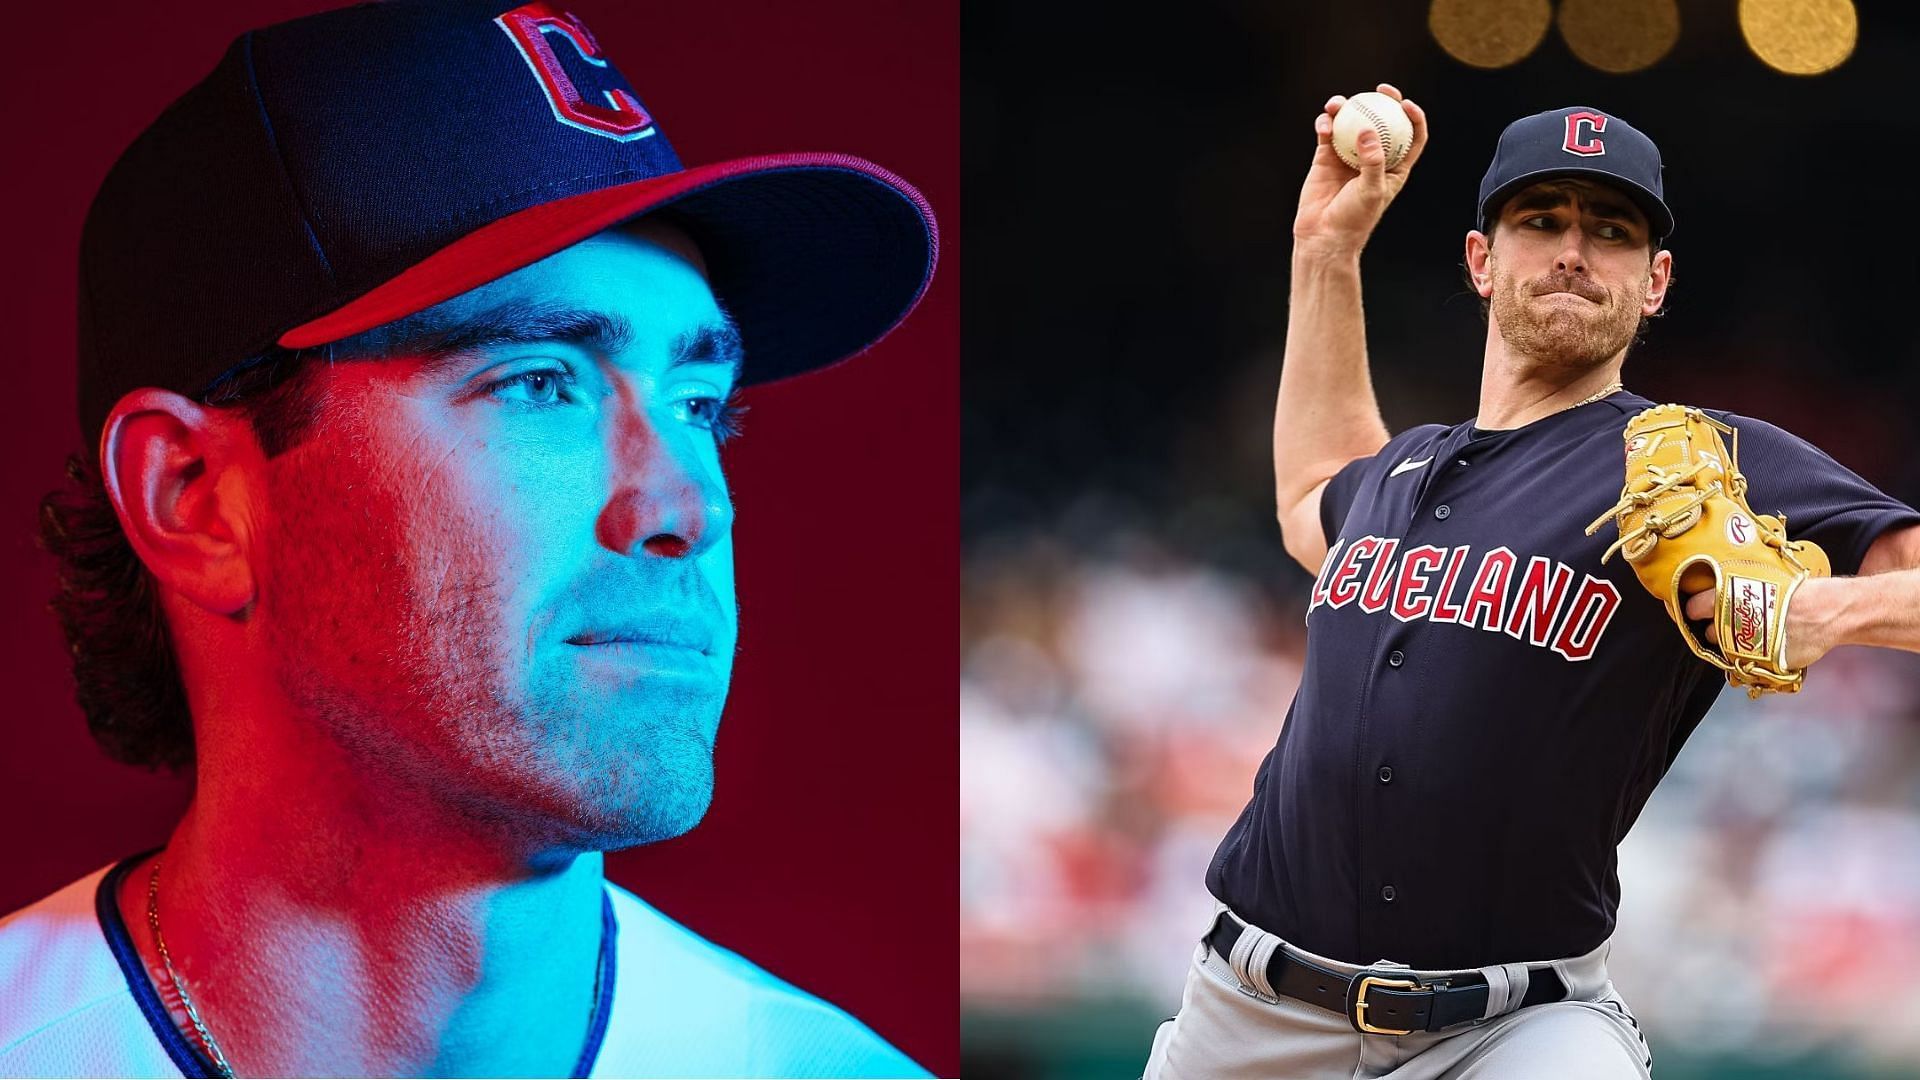 Shane Bieber May Be the Most Interesting Name at the Deadline